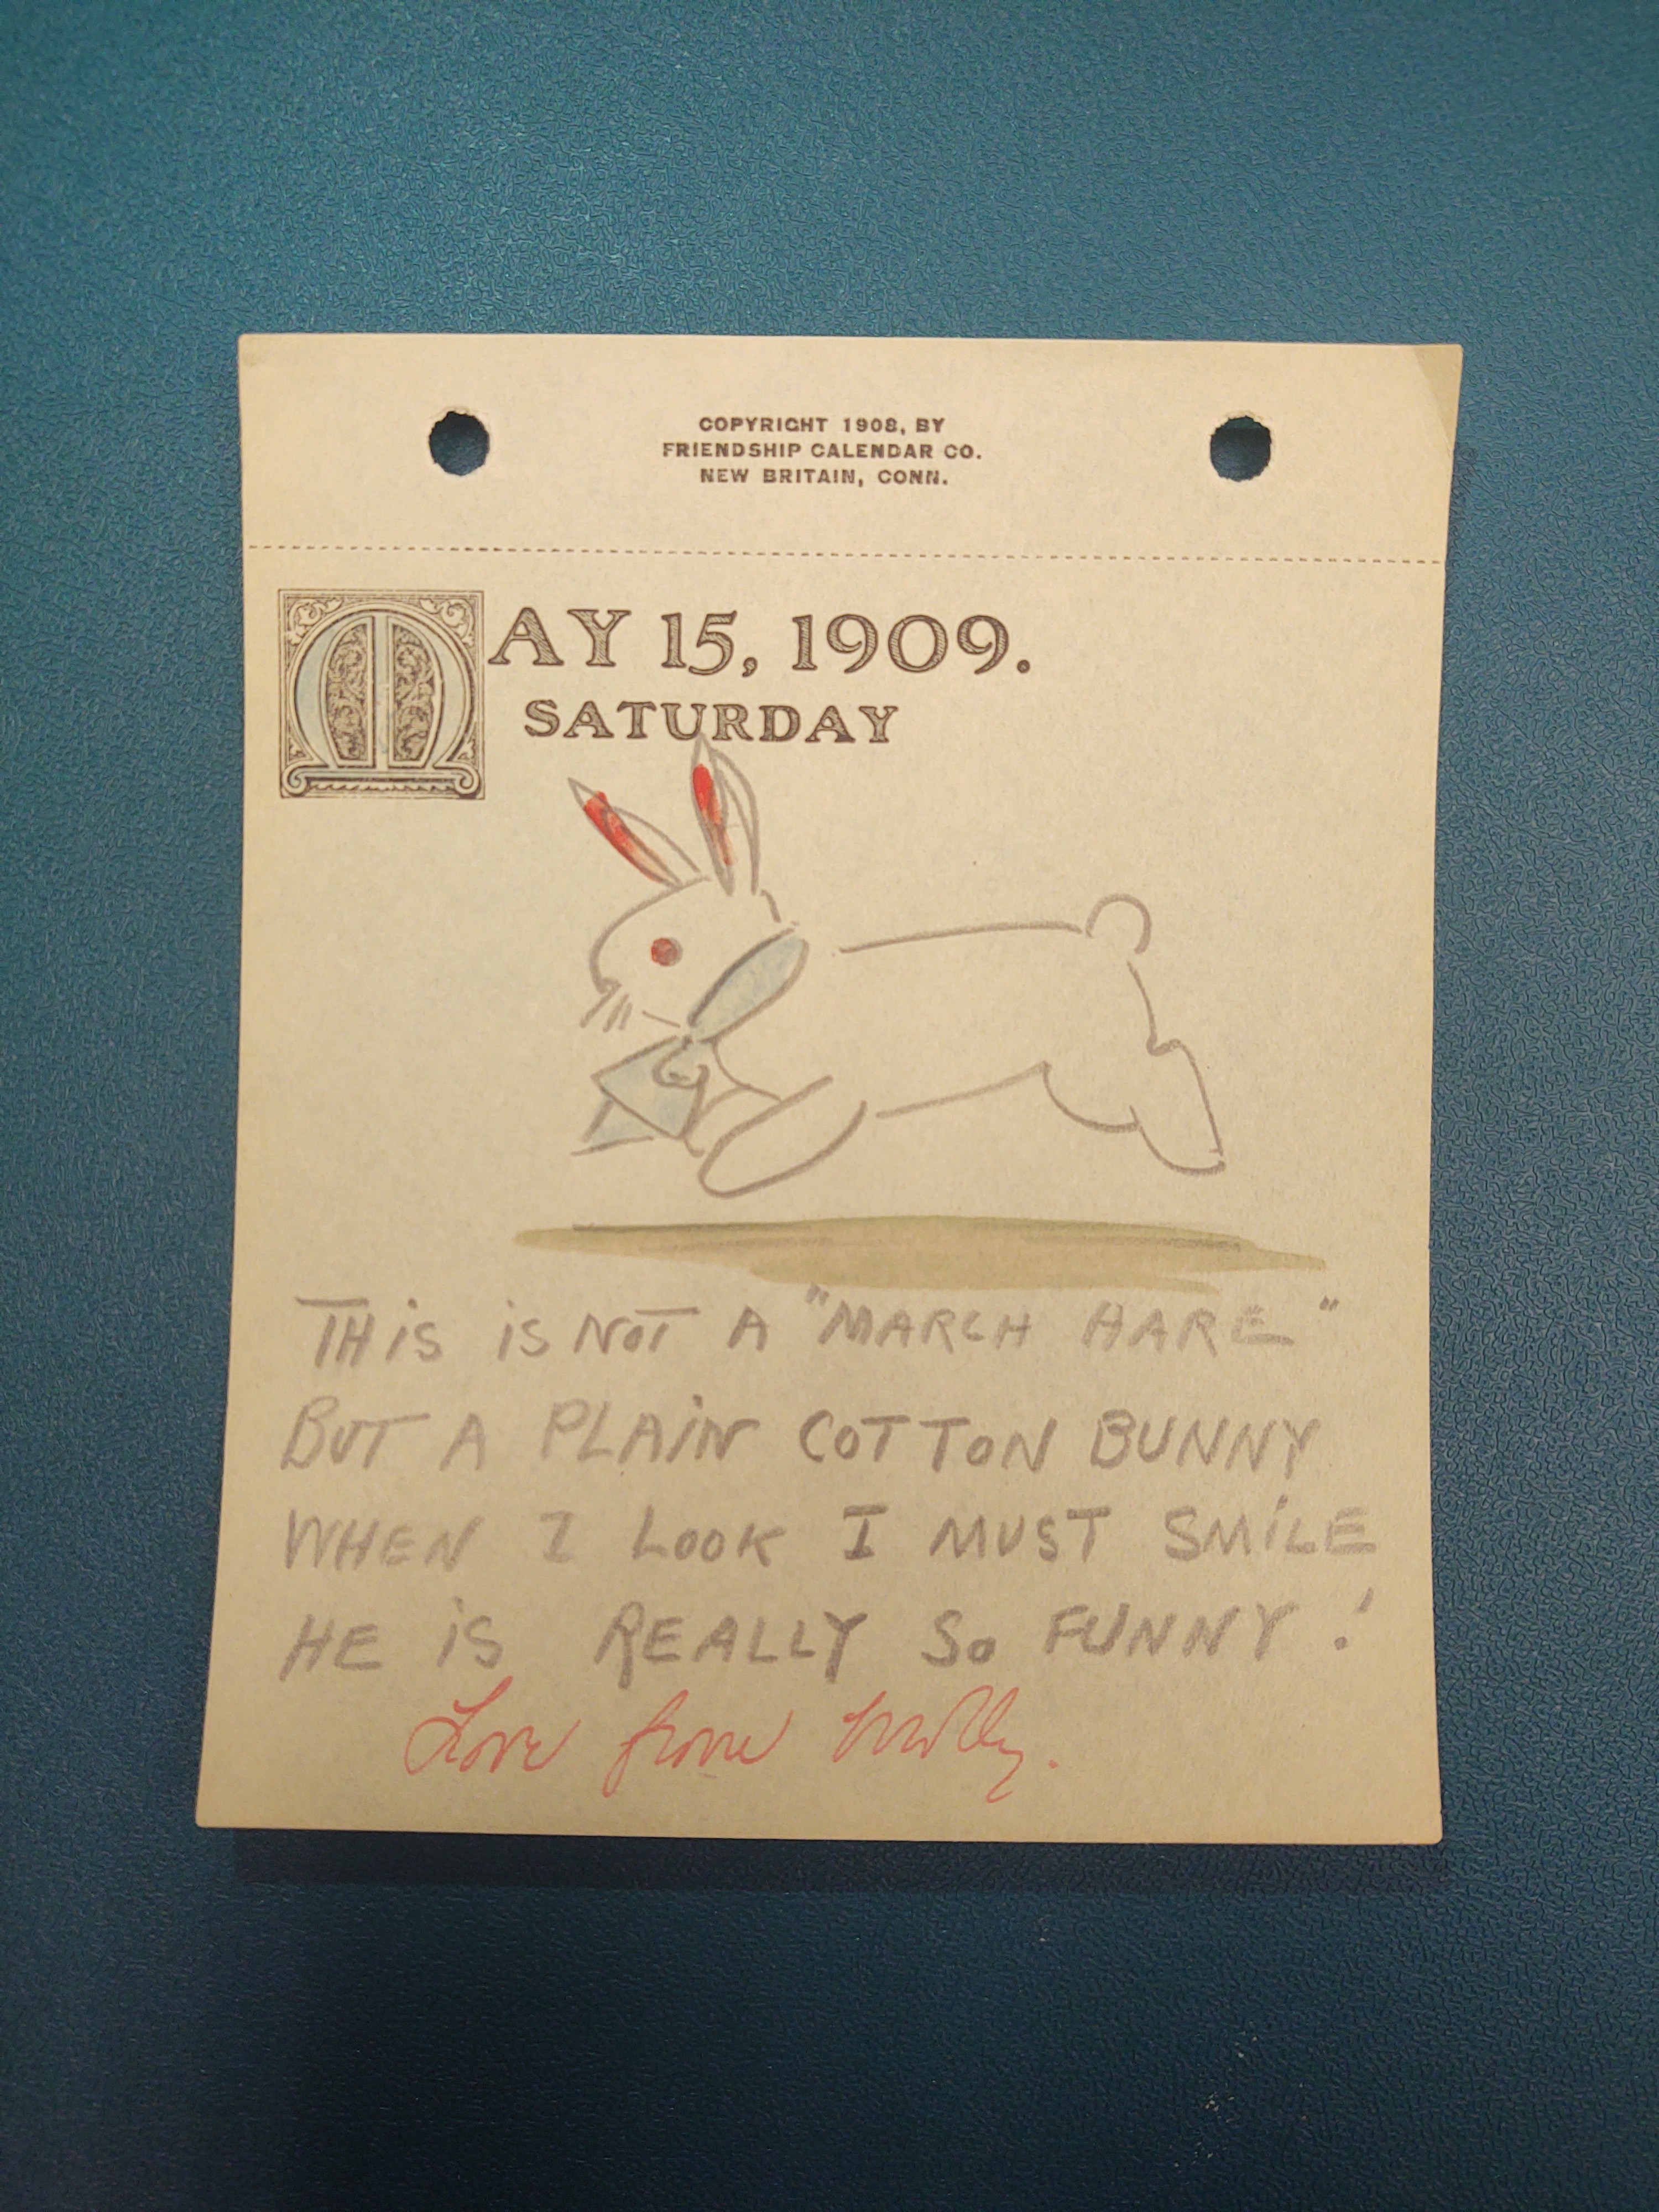 May 15, 1909. Saturday: Drawing of a bunny that is hopping with a blue tie around its collar and red ears.